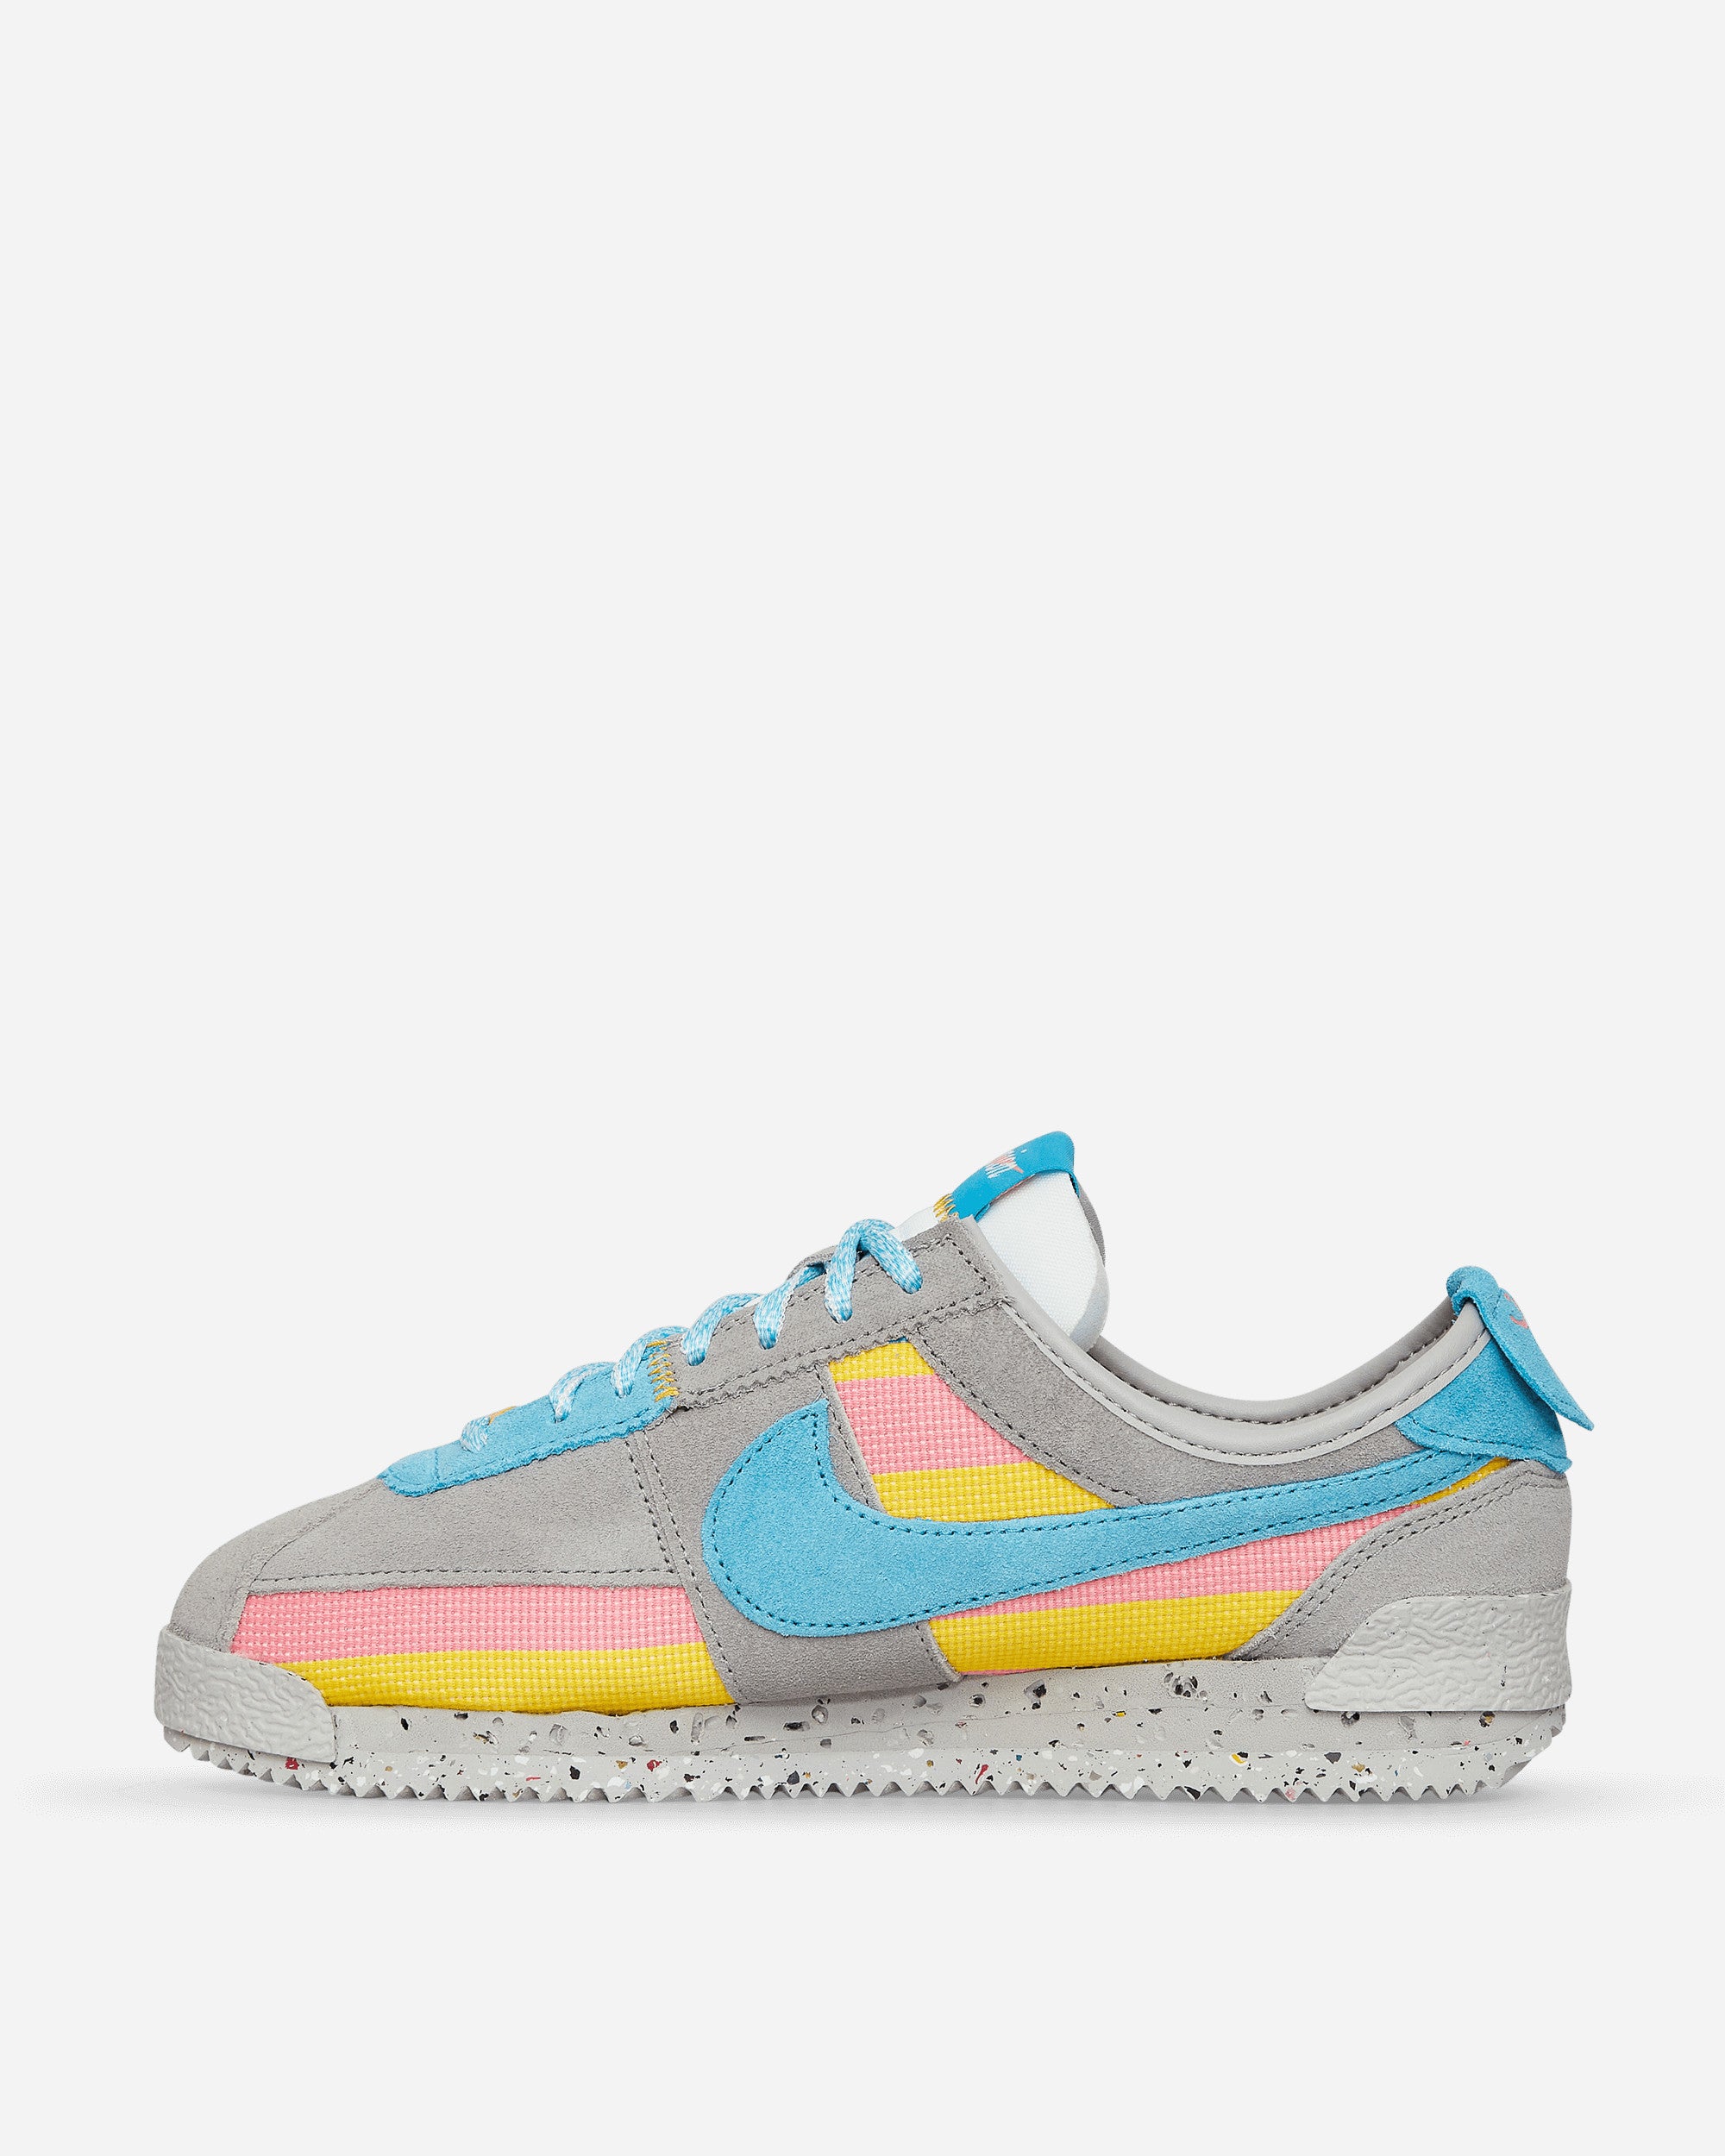 Nike Special Project Cortez Sp Lt Smoke Grey/Blue Fury Sneakers Low DR1413-002